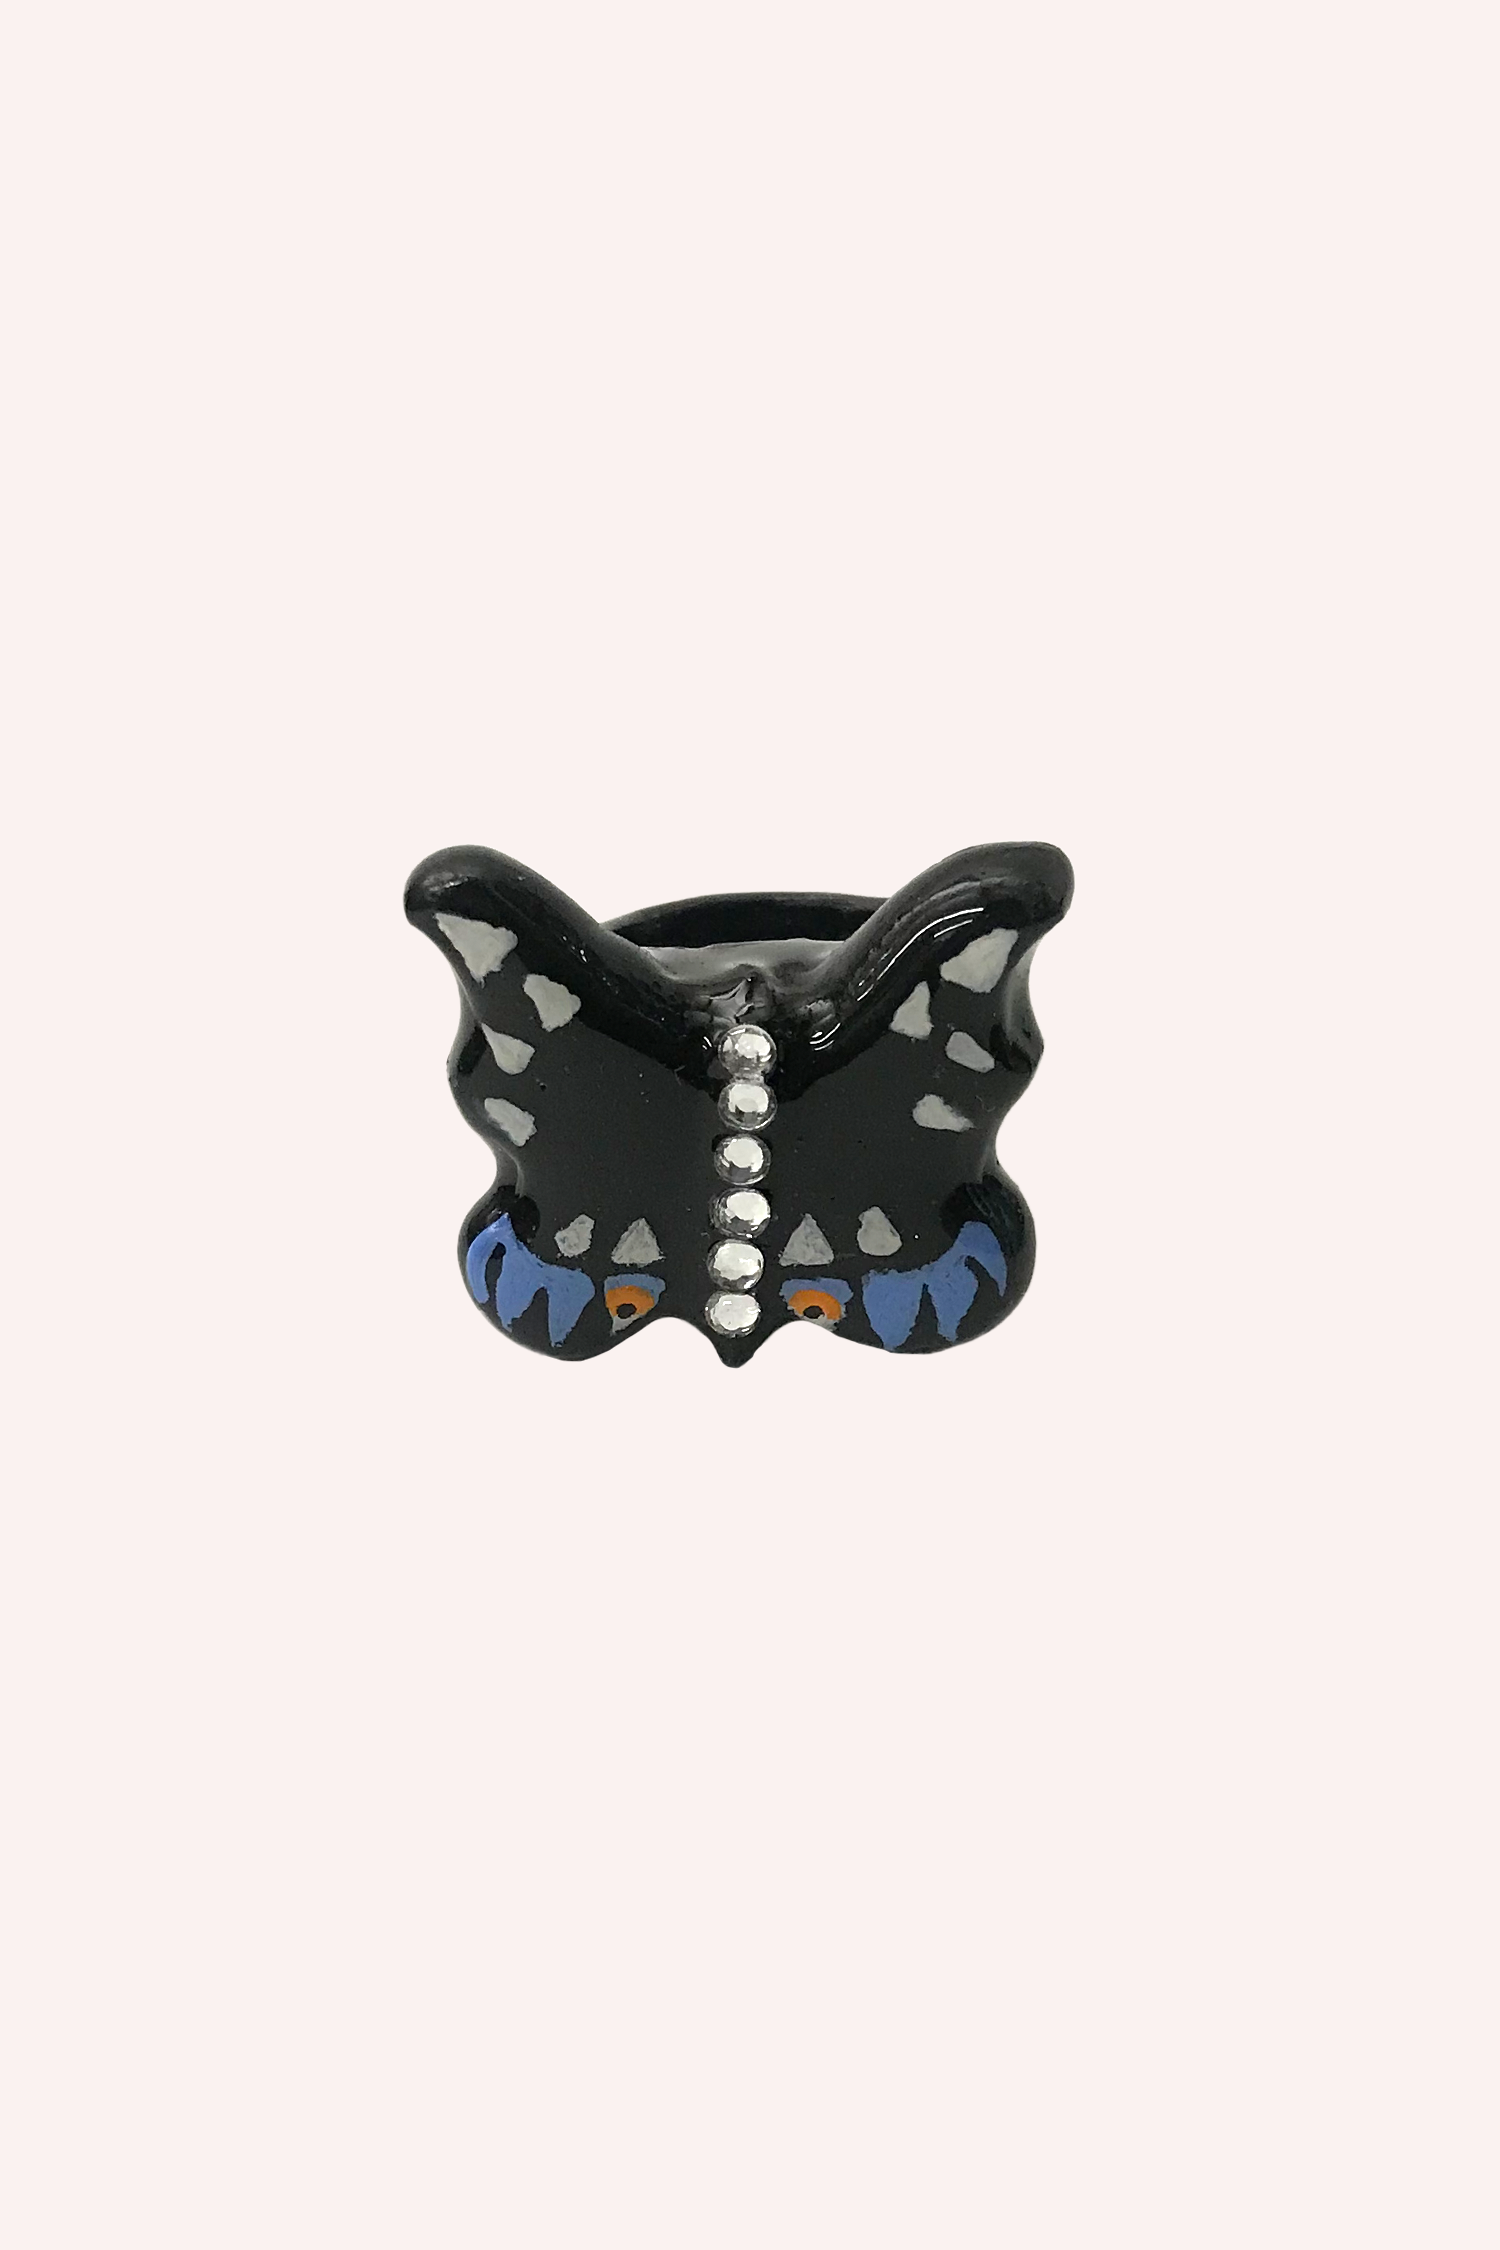 Swallowtail chunky butterfly with blue, orange, and grey hand painted shape on wings  